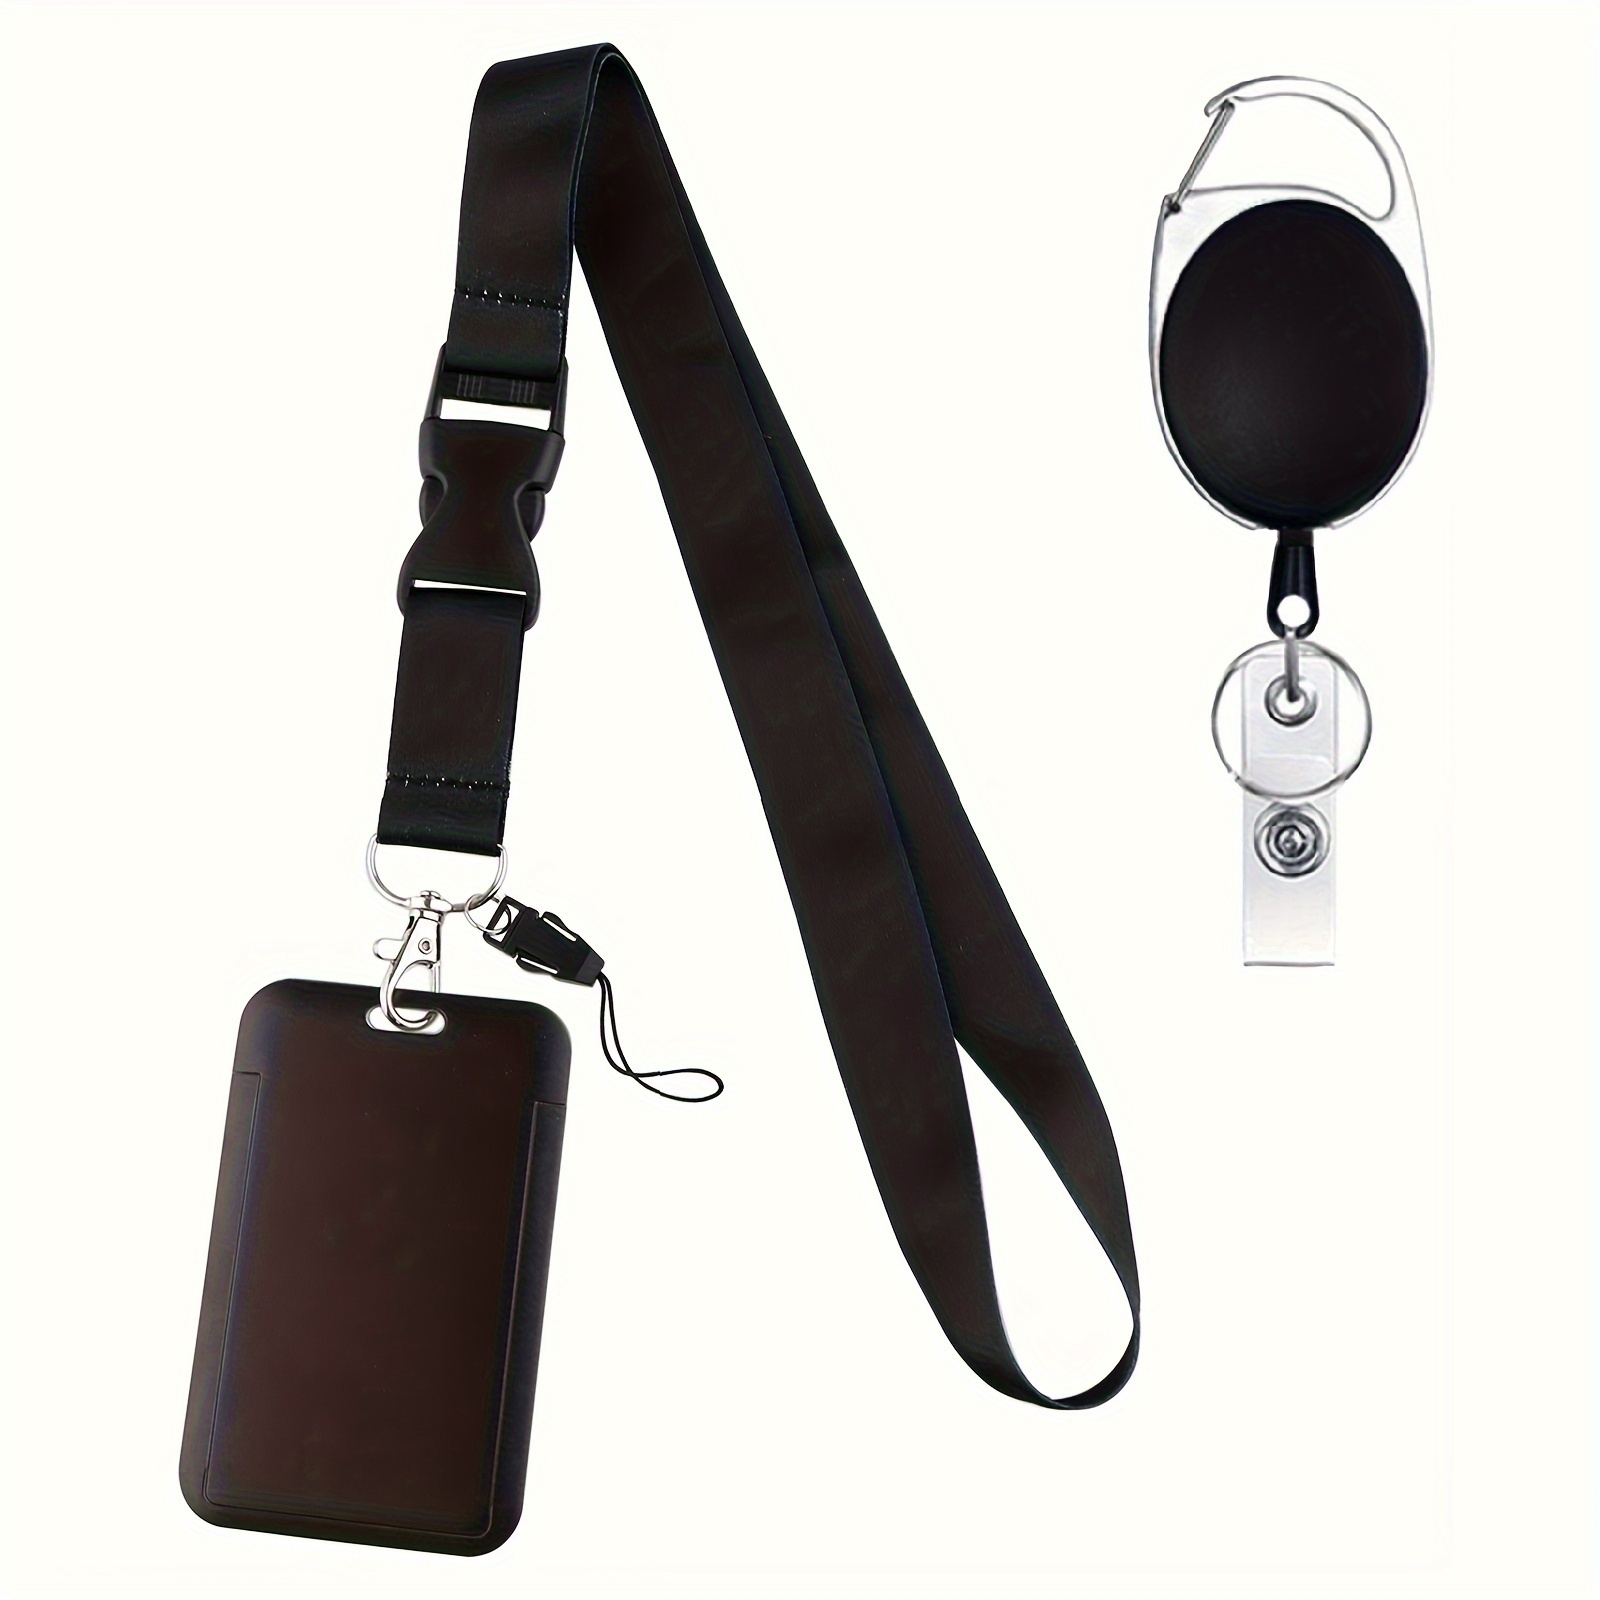 ID CARD & Badge Holder Retractable Reel For lanyard and security